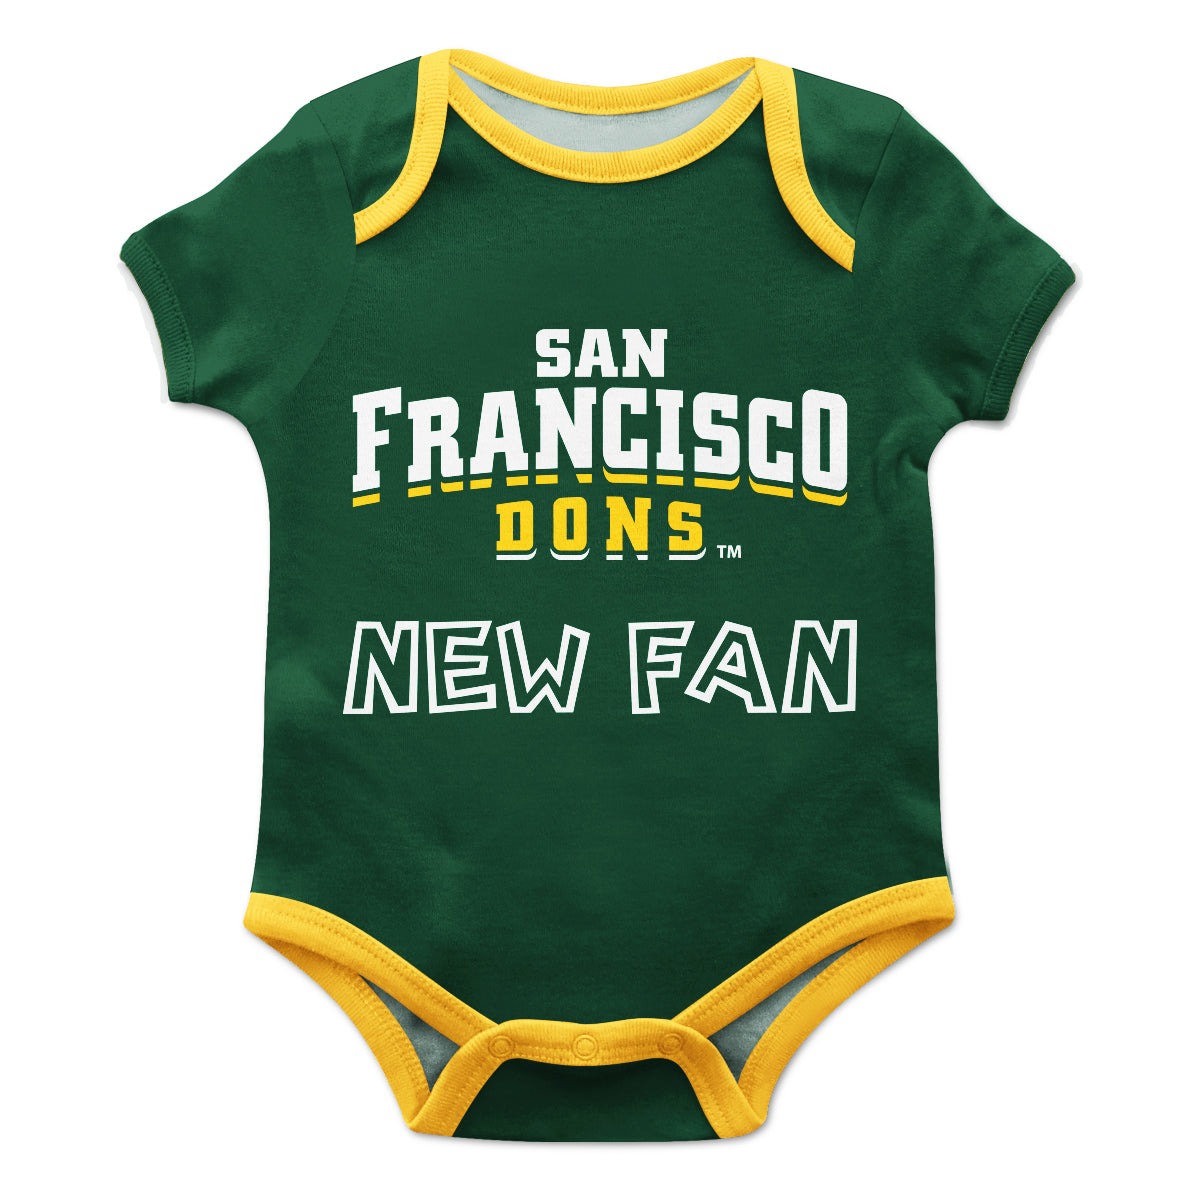 San Francisco Dons USF Infant Game Day Green Short Sleeve One Piece Jumpsuit by Vive La Fete